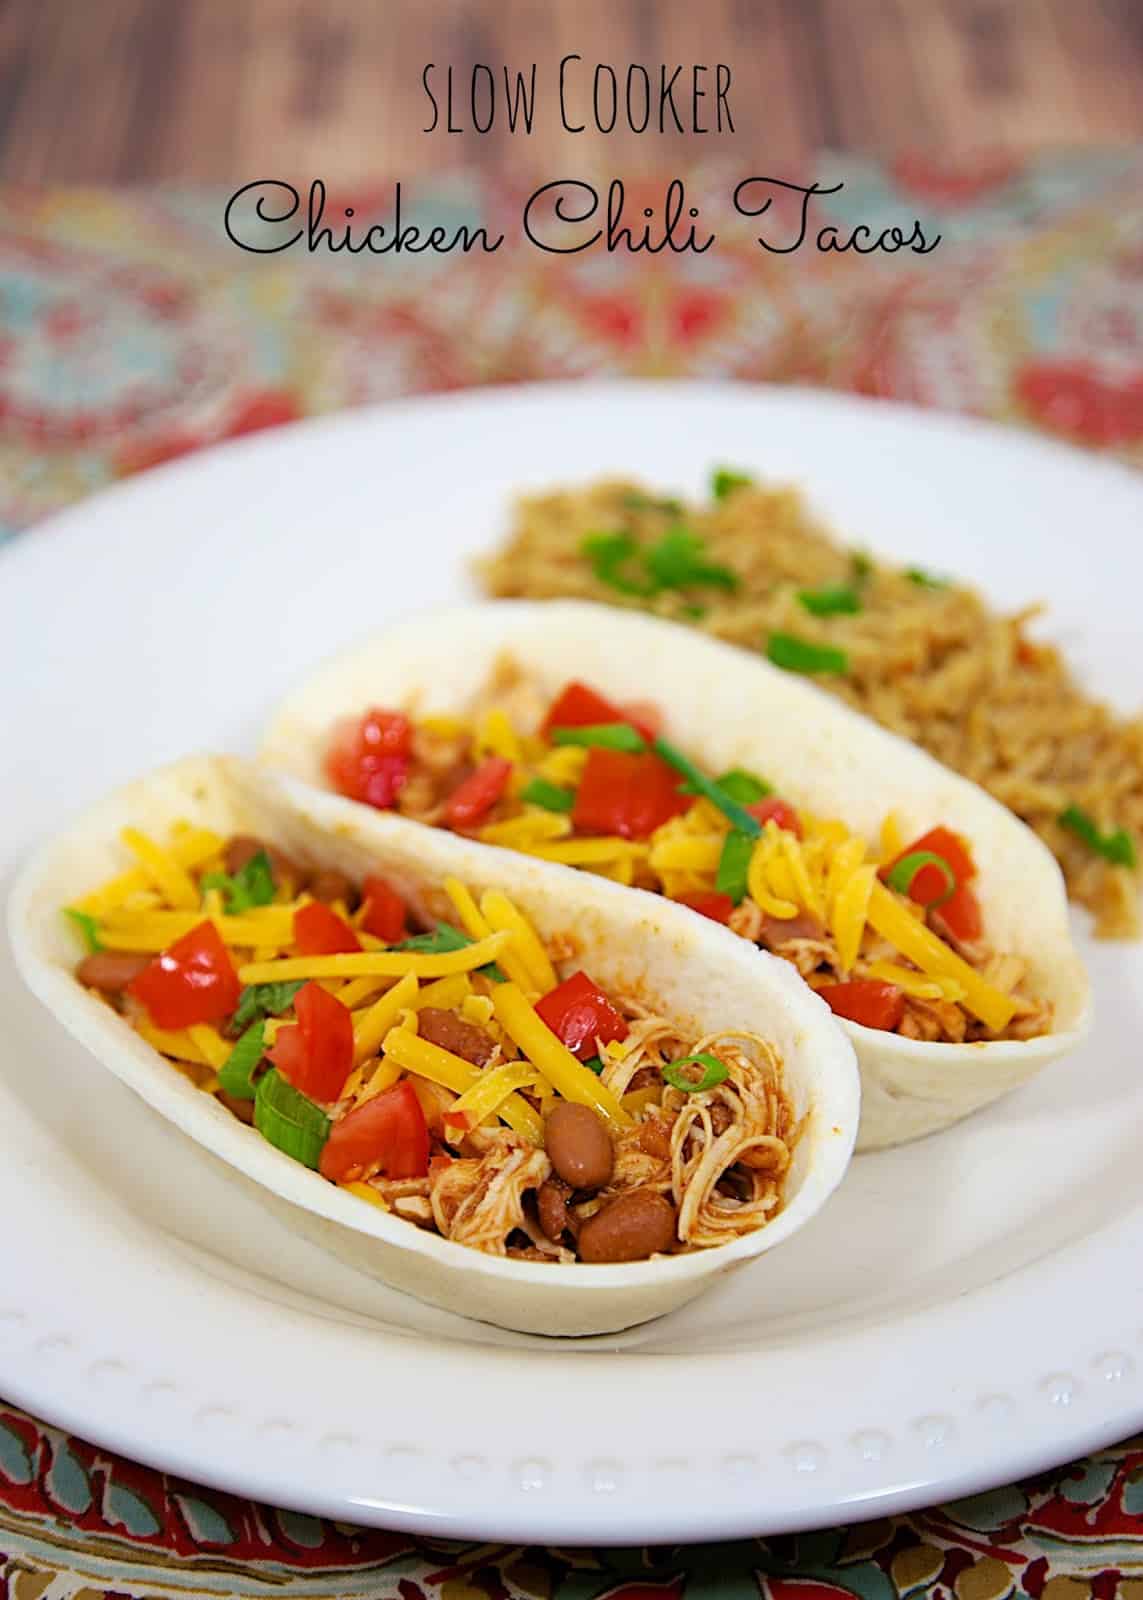 Slow Cooker Chicken Chili Tacos - only 3 ingredients! Great for tacos, topping a salad, or nachos. Makes a ton! Freeze leftovers for later. Everyone loves this easy Slow Cooker Mexican Chicken recipe!